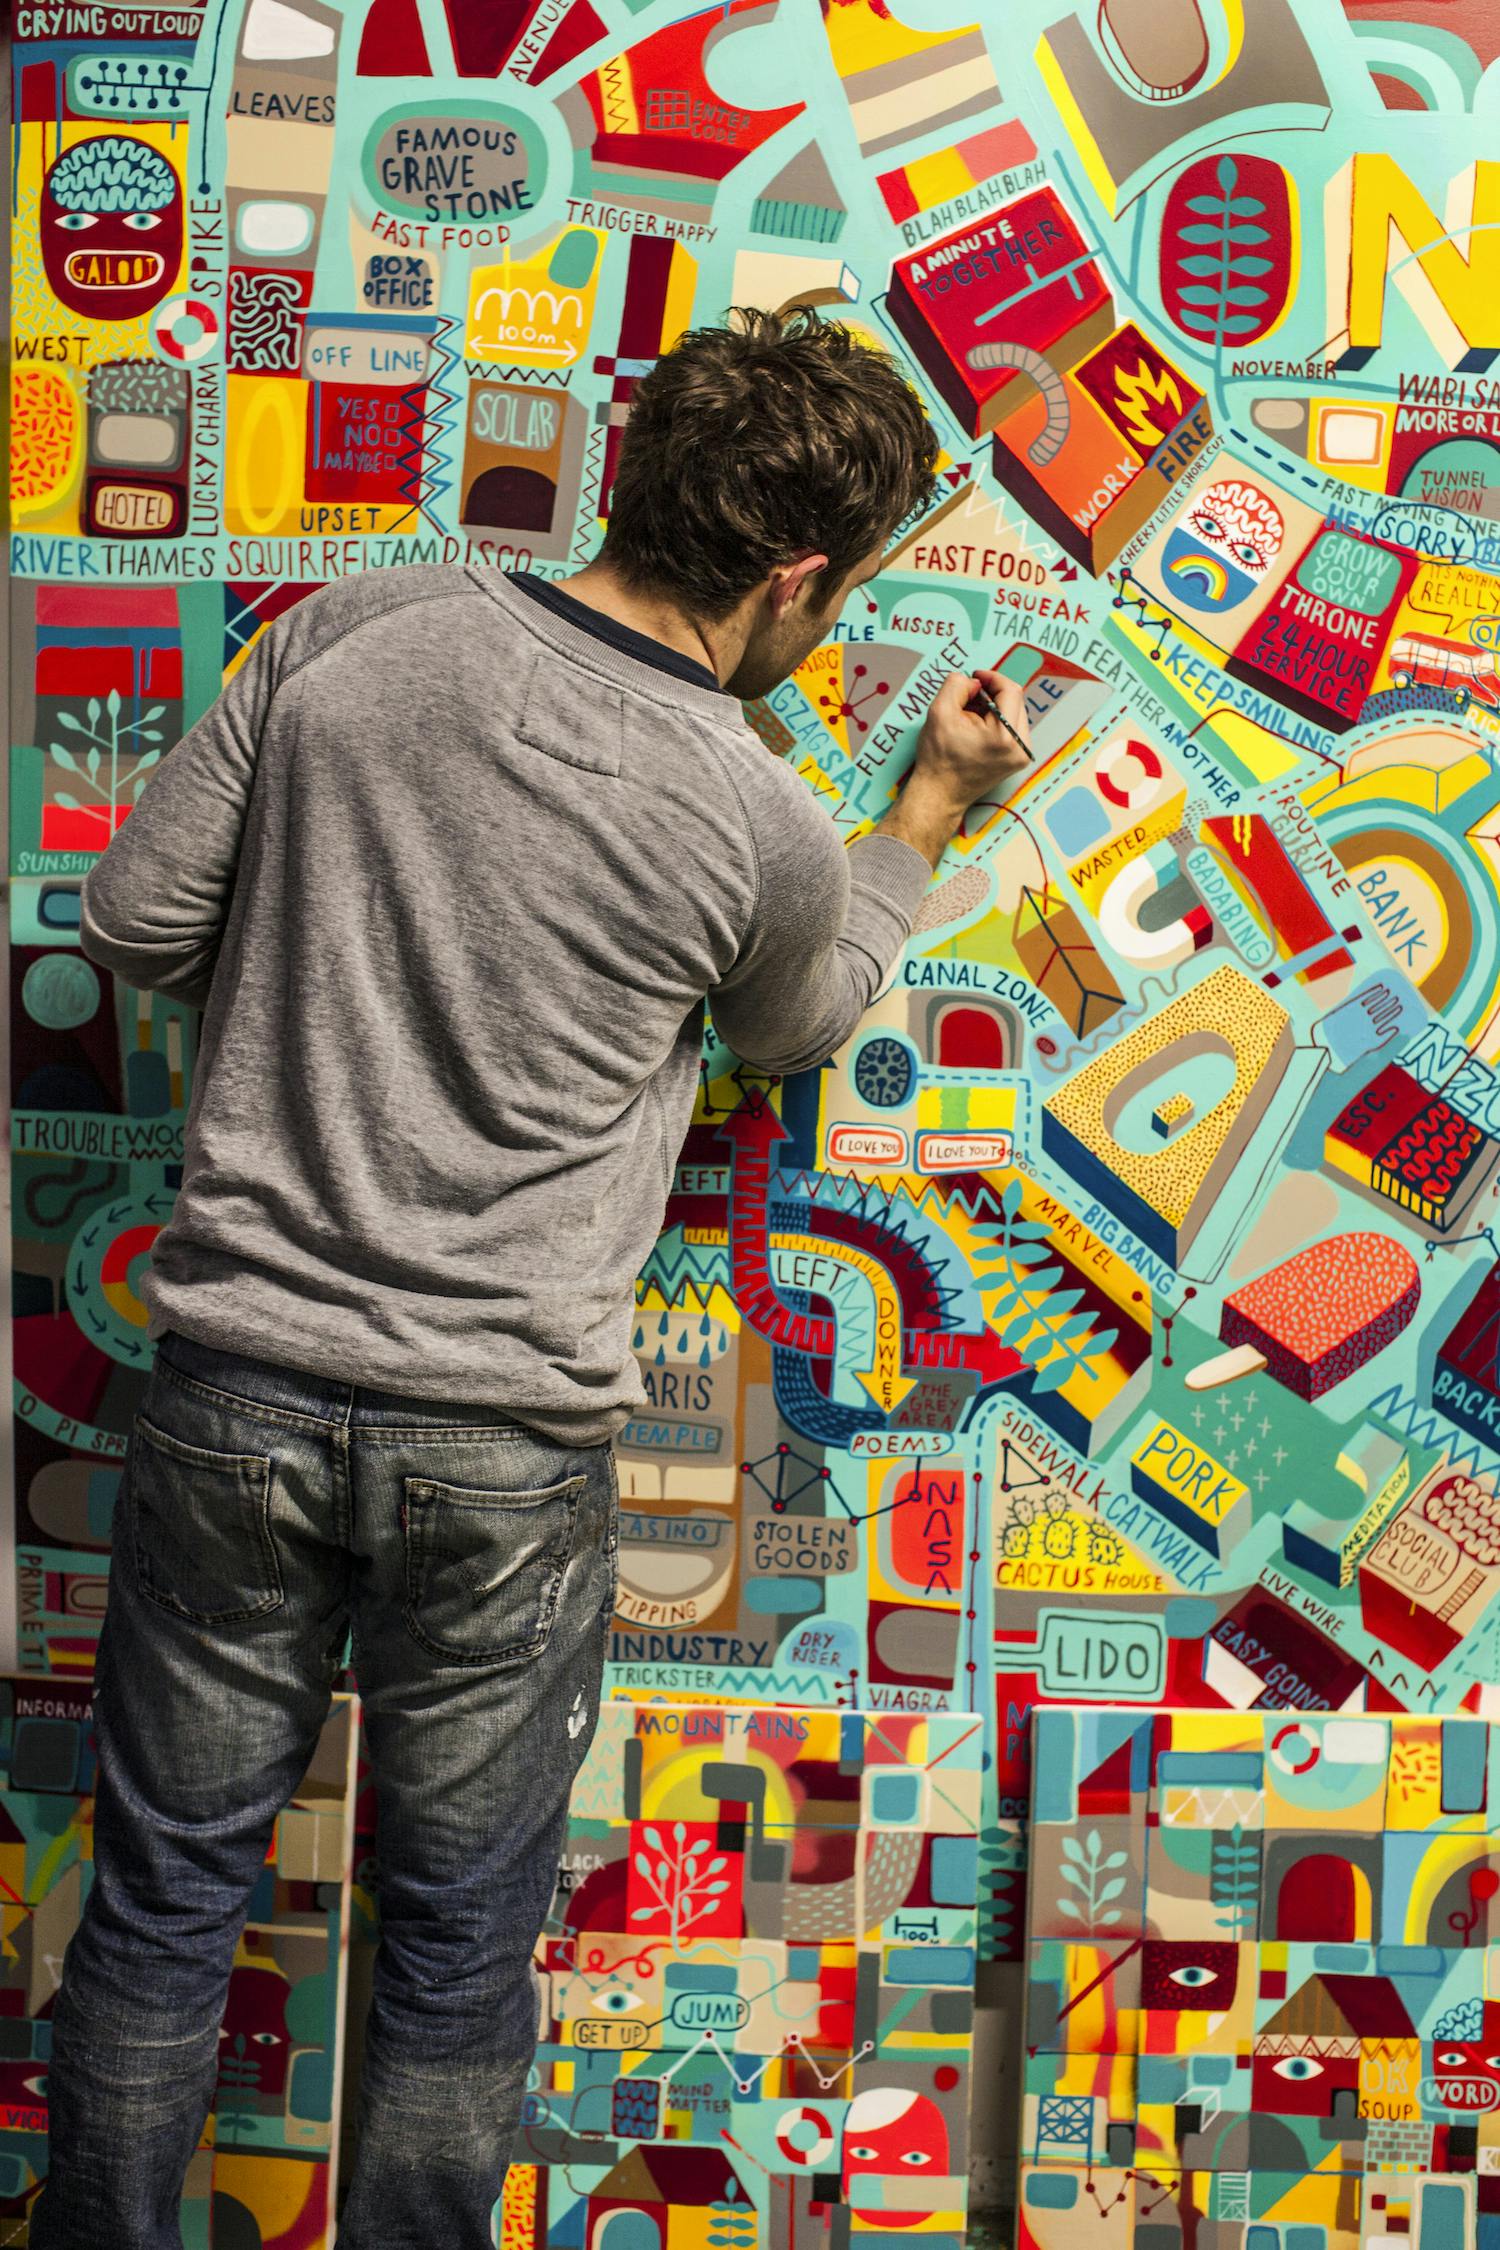 Margate-based painter David Shillinglaw’s thought-provoking patterns